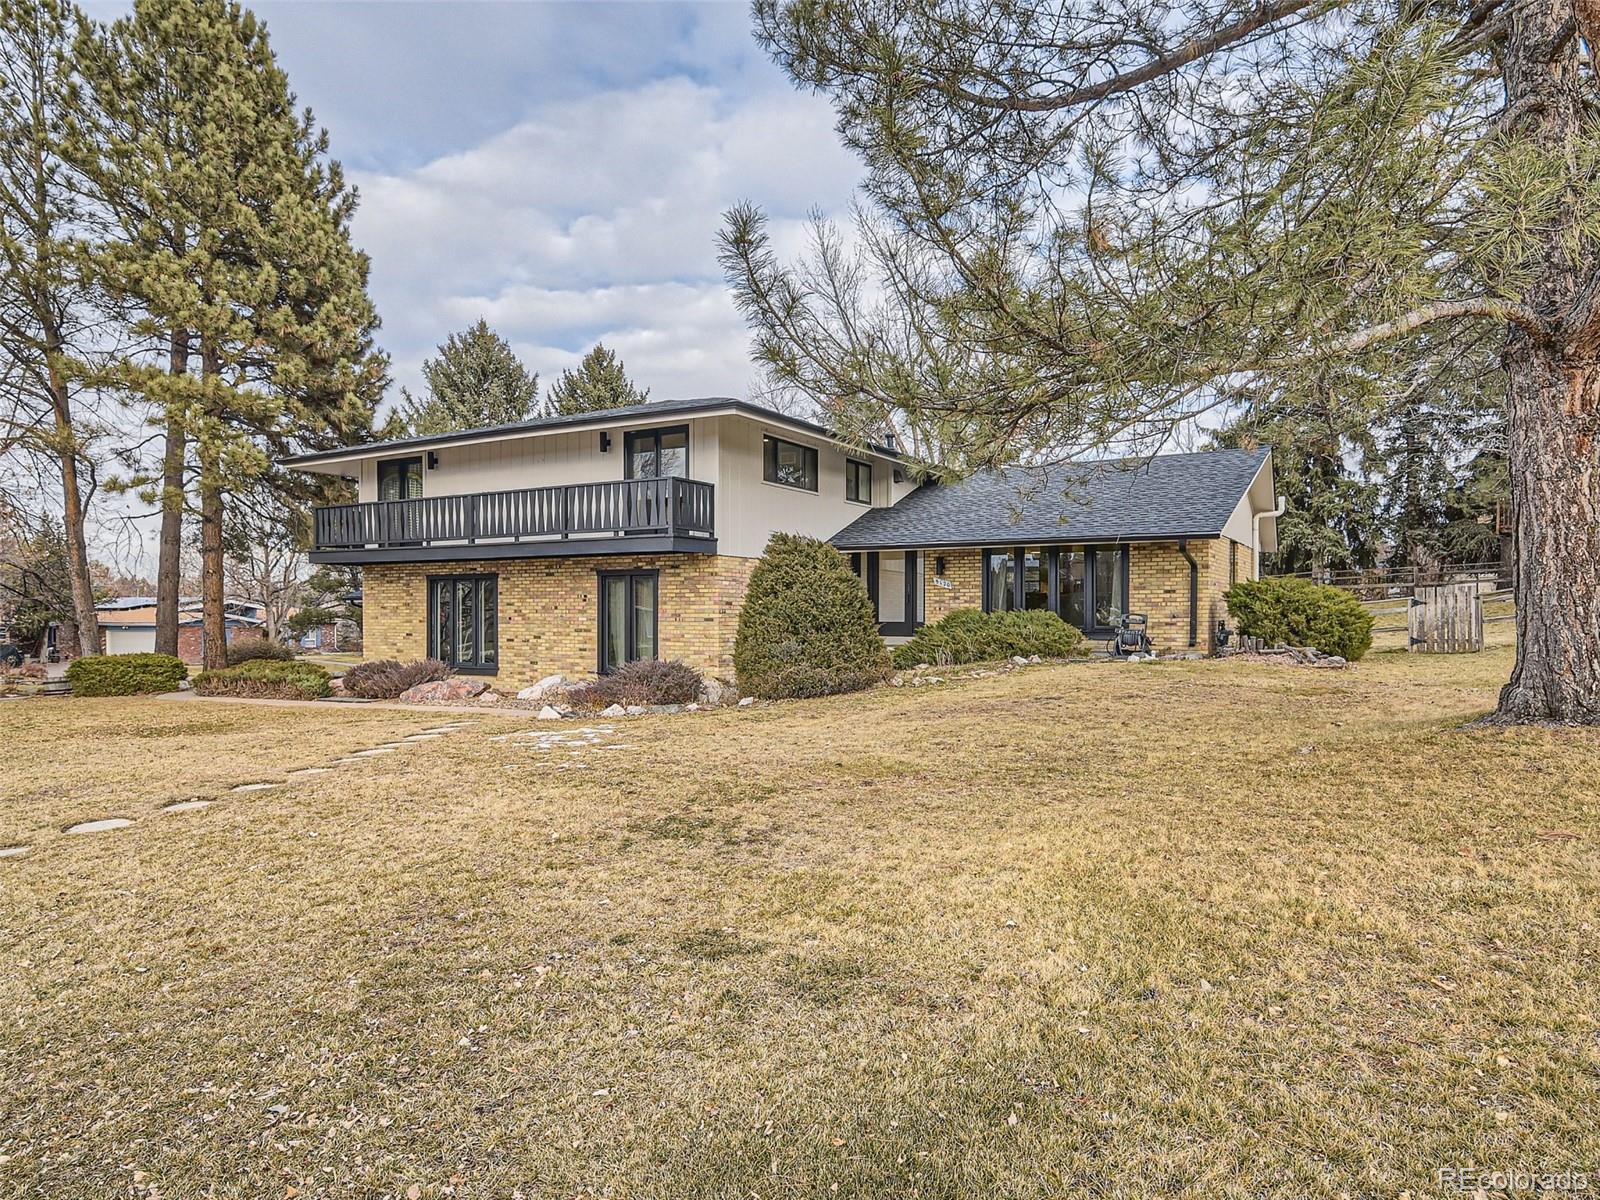 Report Image for 5120 W Plymouth Drive,Littleton, Colorado